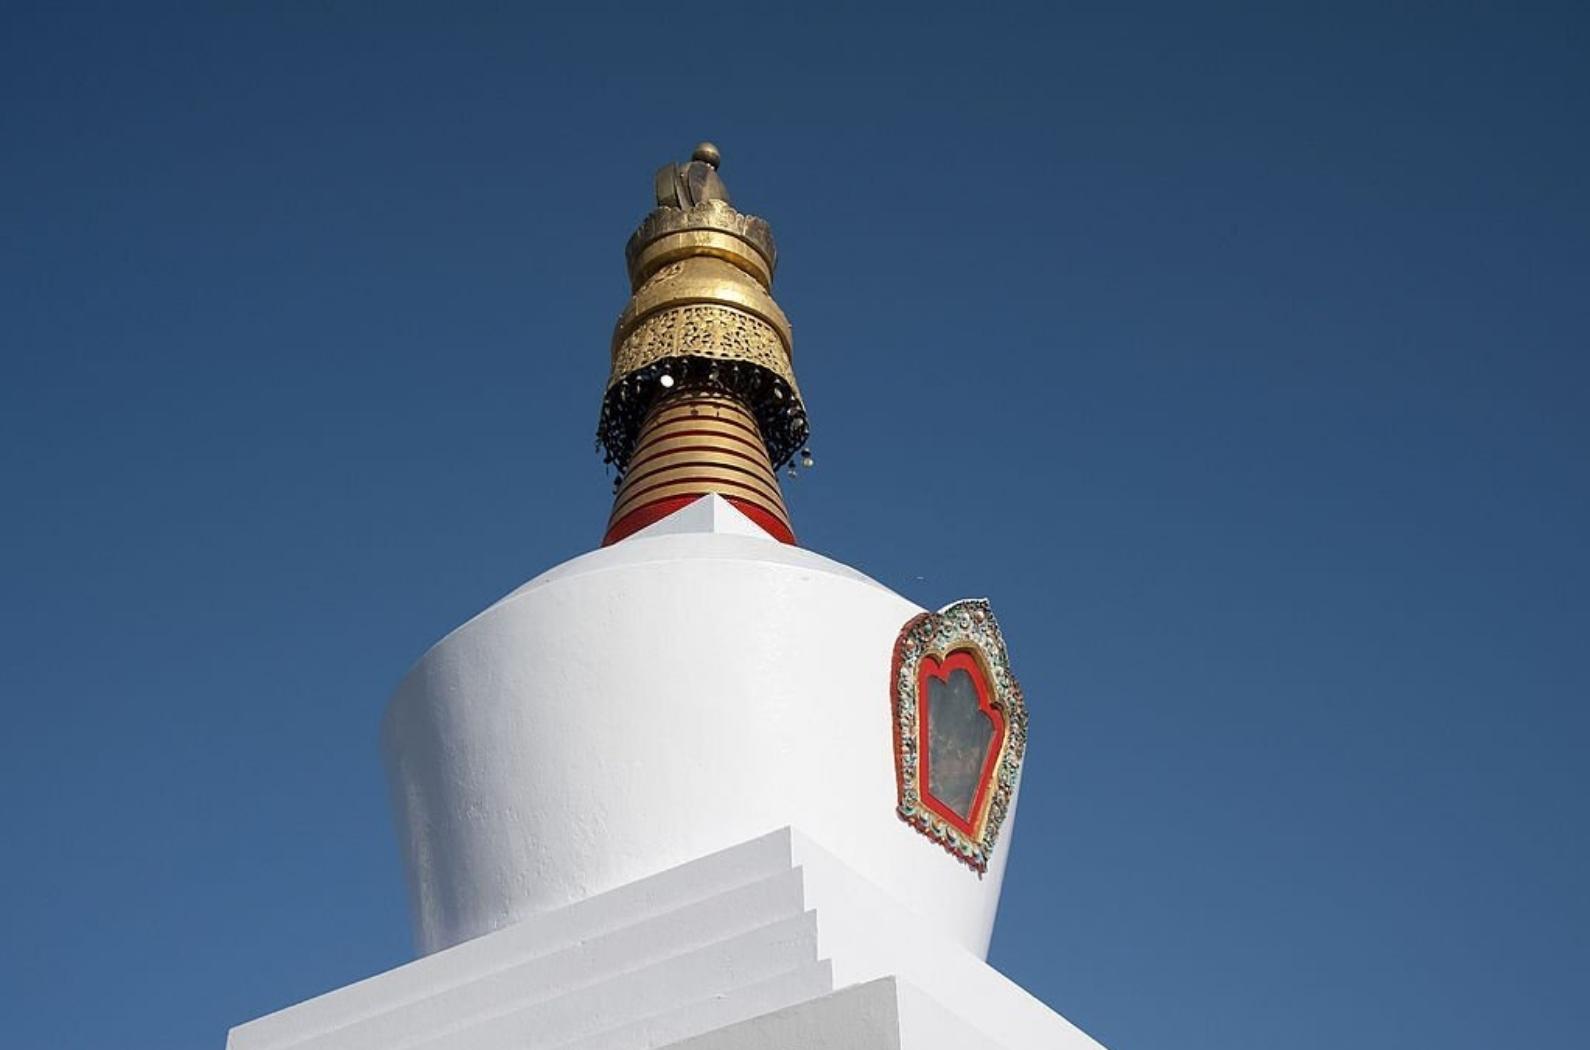 Stupa at the Enchey Monastery or Gompa in Gangtok.